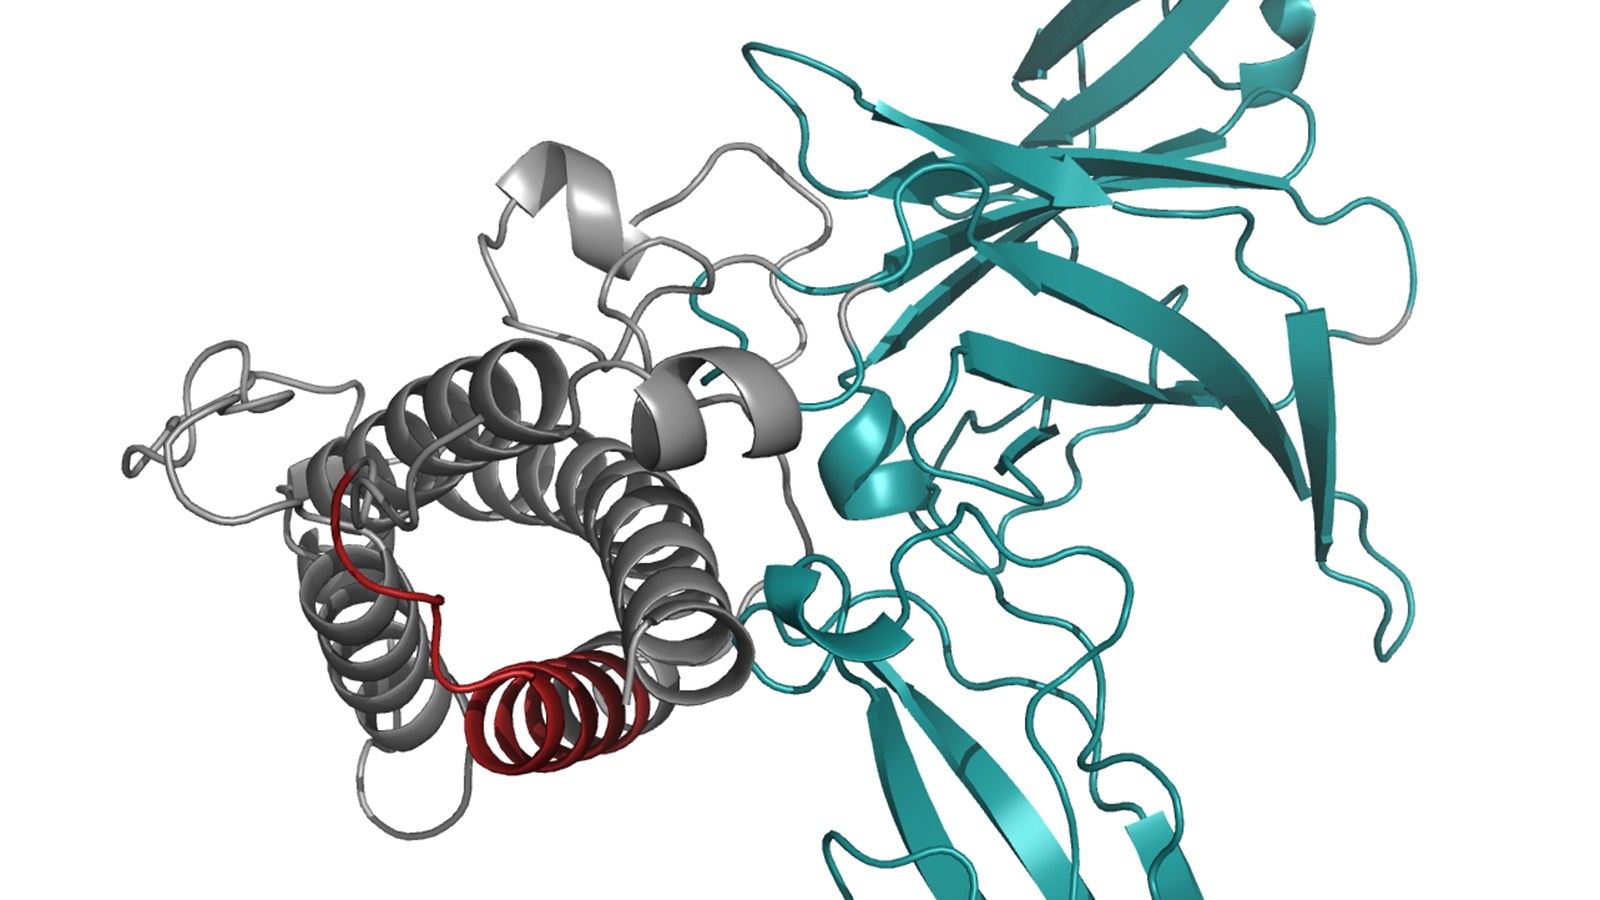 Structure of the of the signal protein interleukin 23.